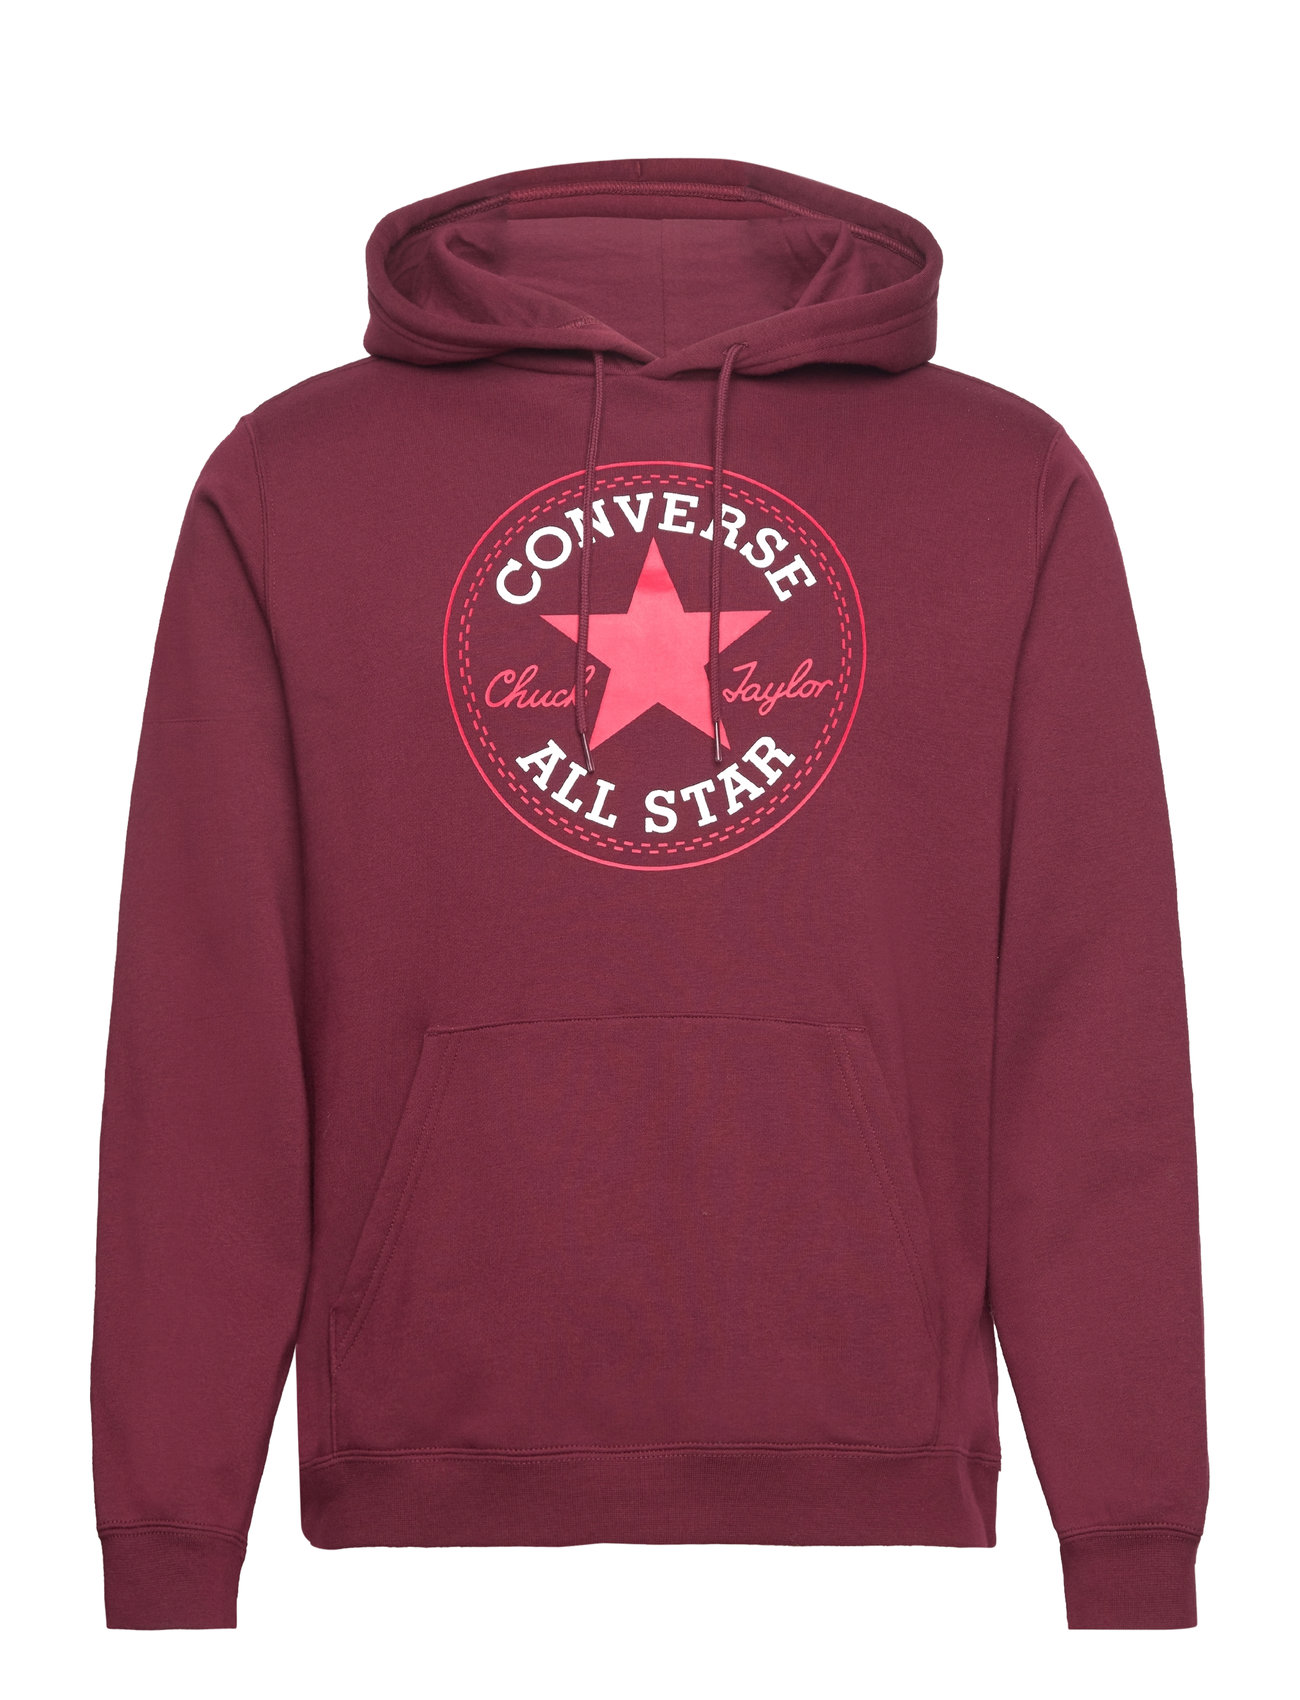 Standard - Chuck Po Bb Hoodies Large Hoodie Core Center Fit Front Patch Converse